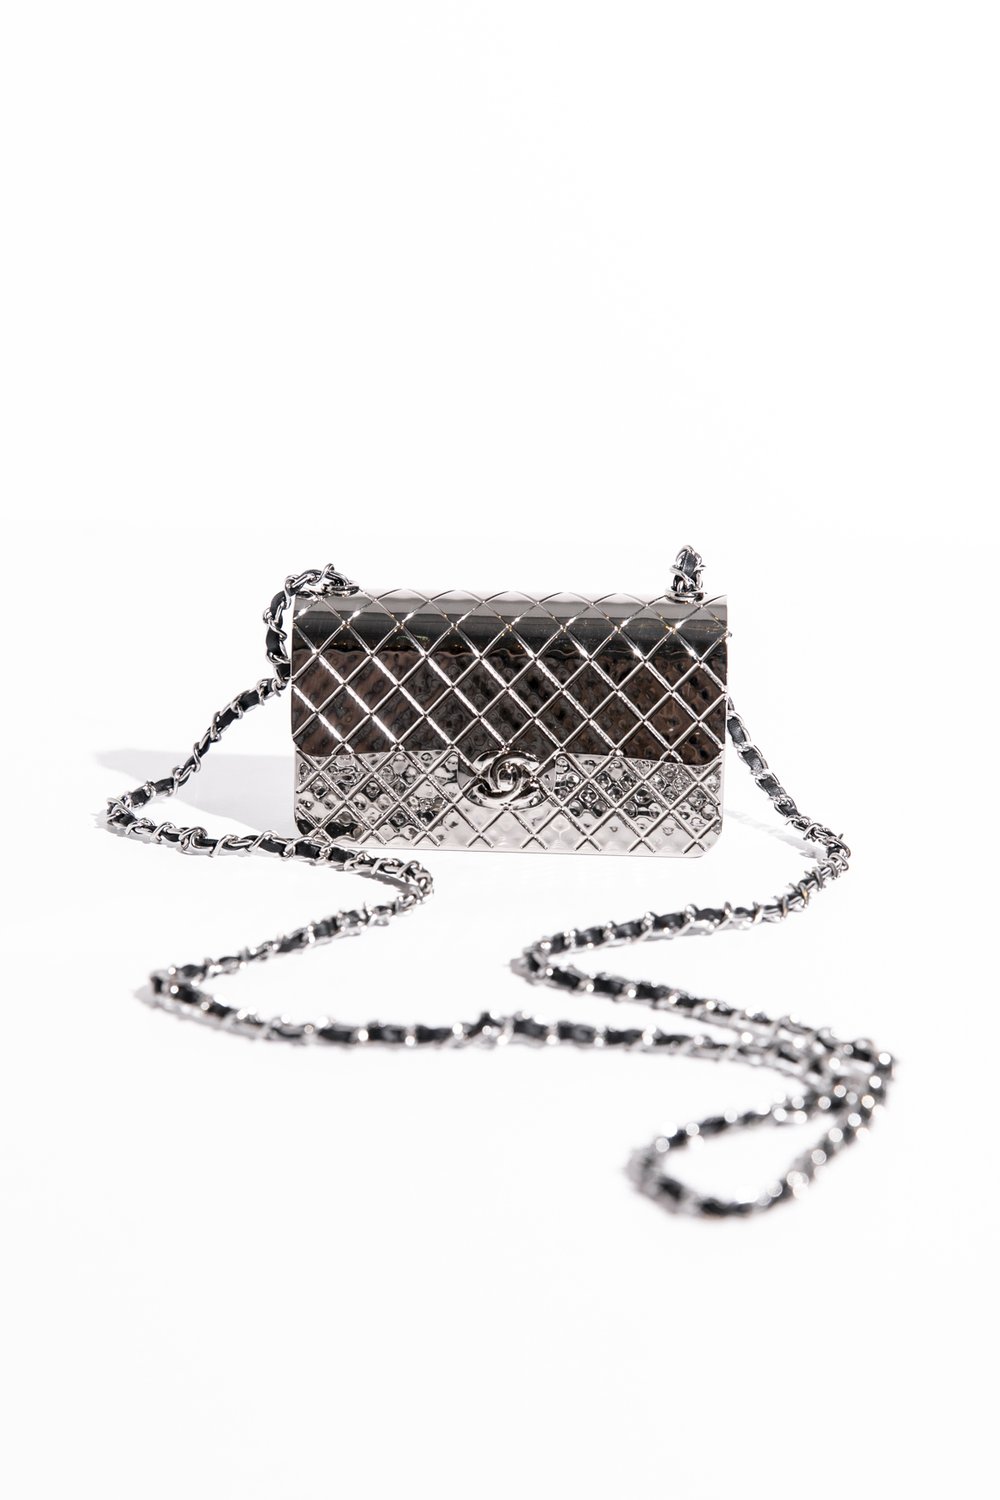 Chanel 2022 Small Flap Bag